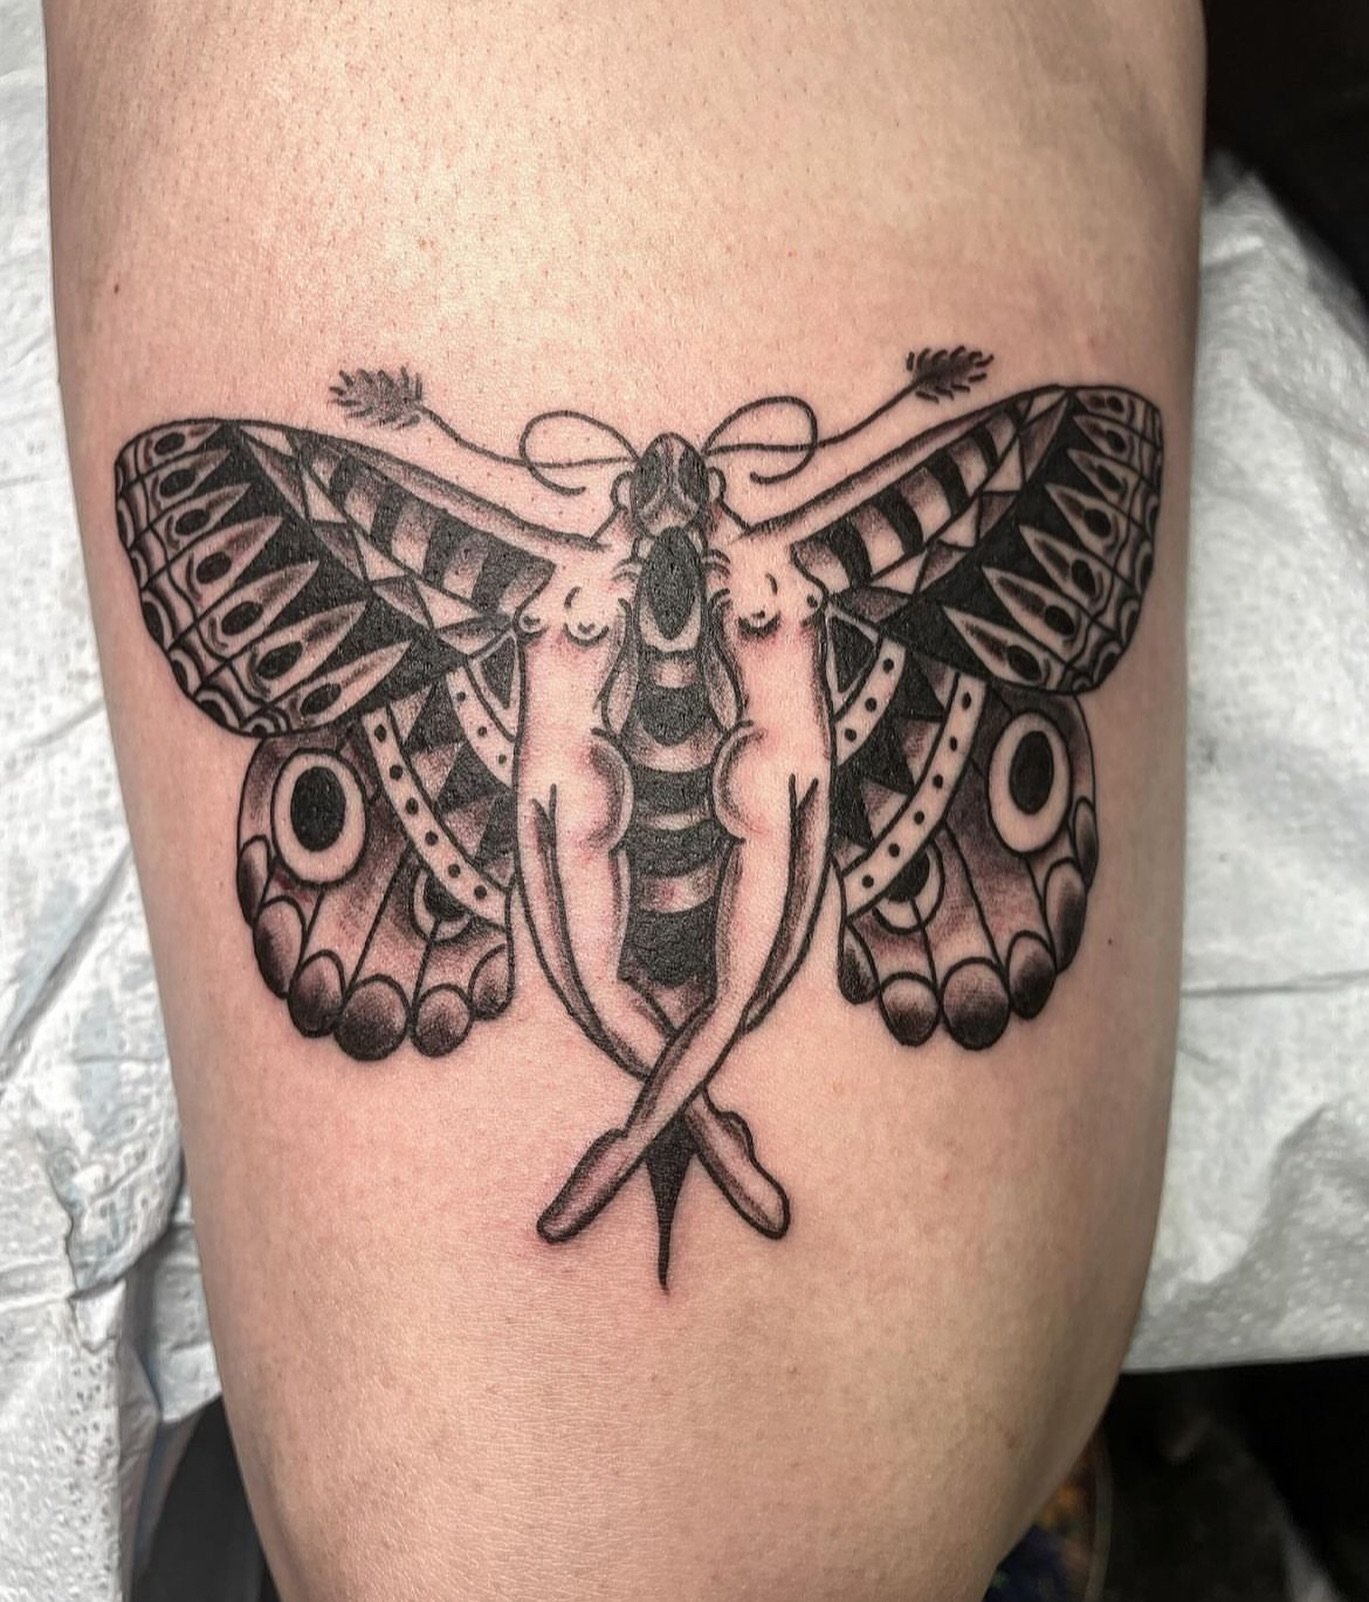 Pretty fly one from @jakeyliketattoo! Flutter on through the shop and catch him for something new of your own.